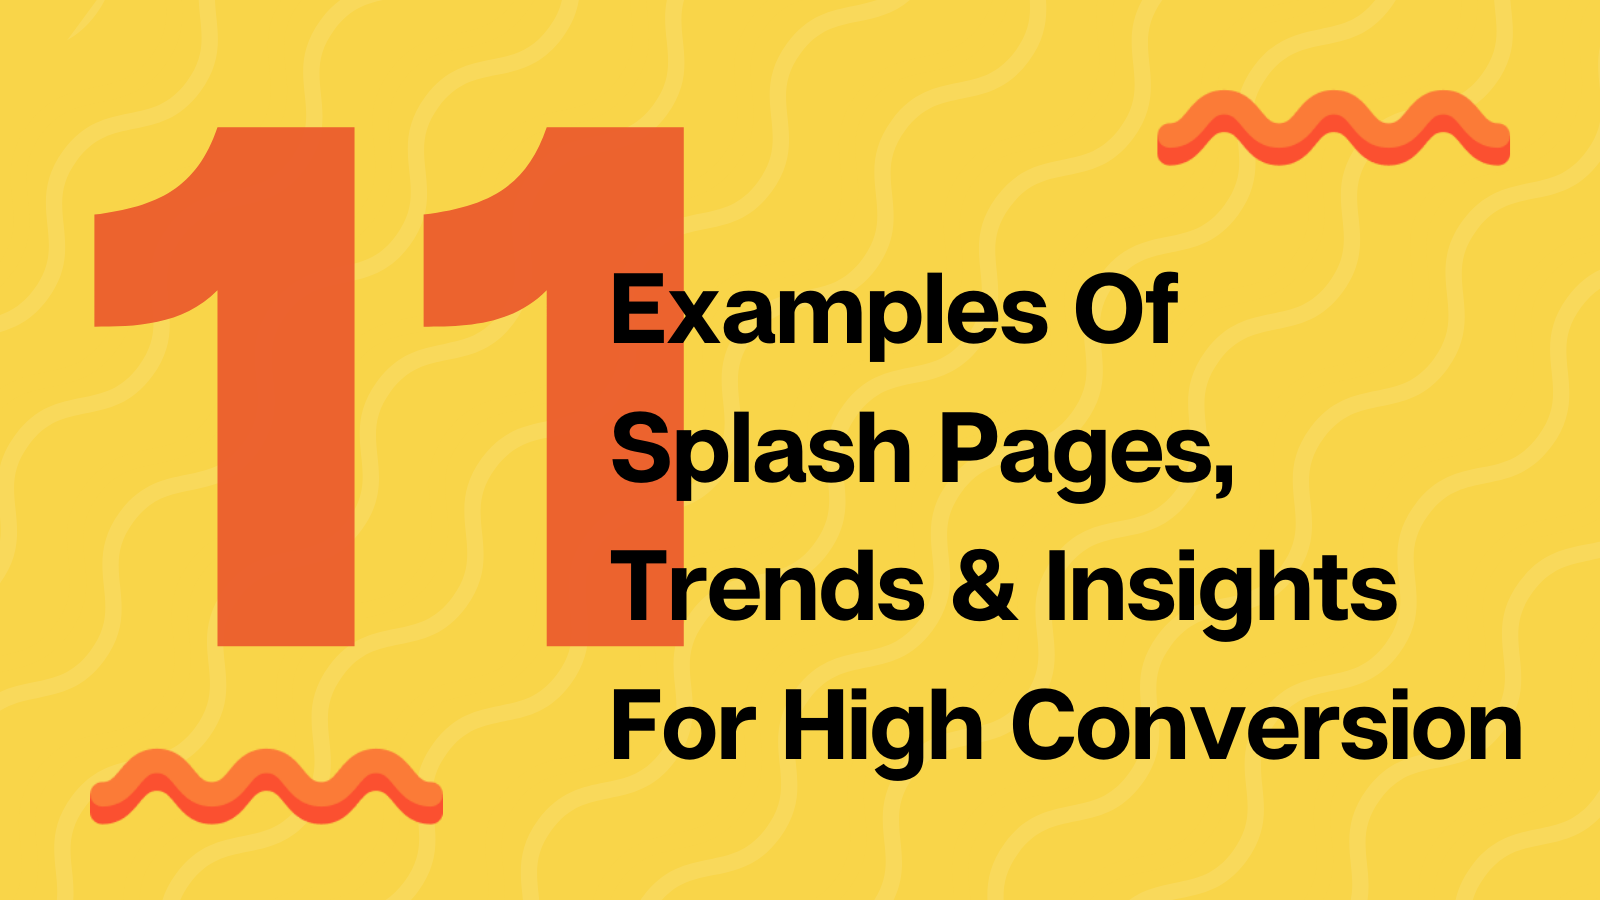 11 Examples Of Splash Pages, Trends & Insights For High Conversion 